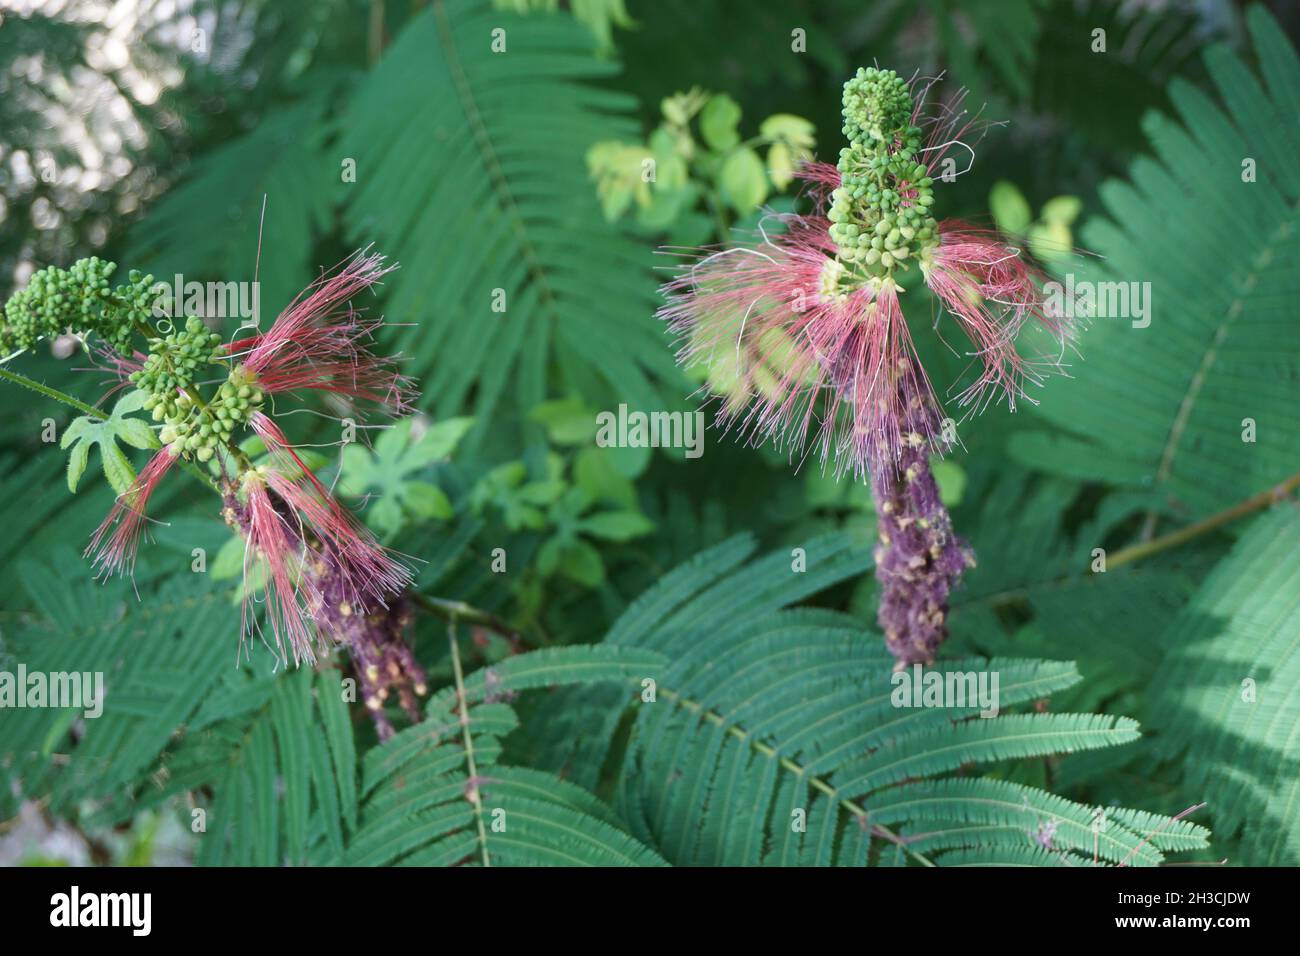 Persian silk tree flower with a natural background Stock Photo